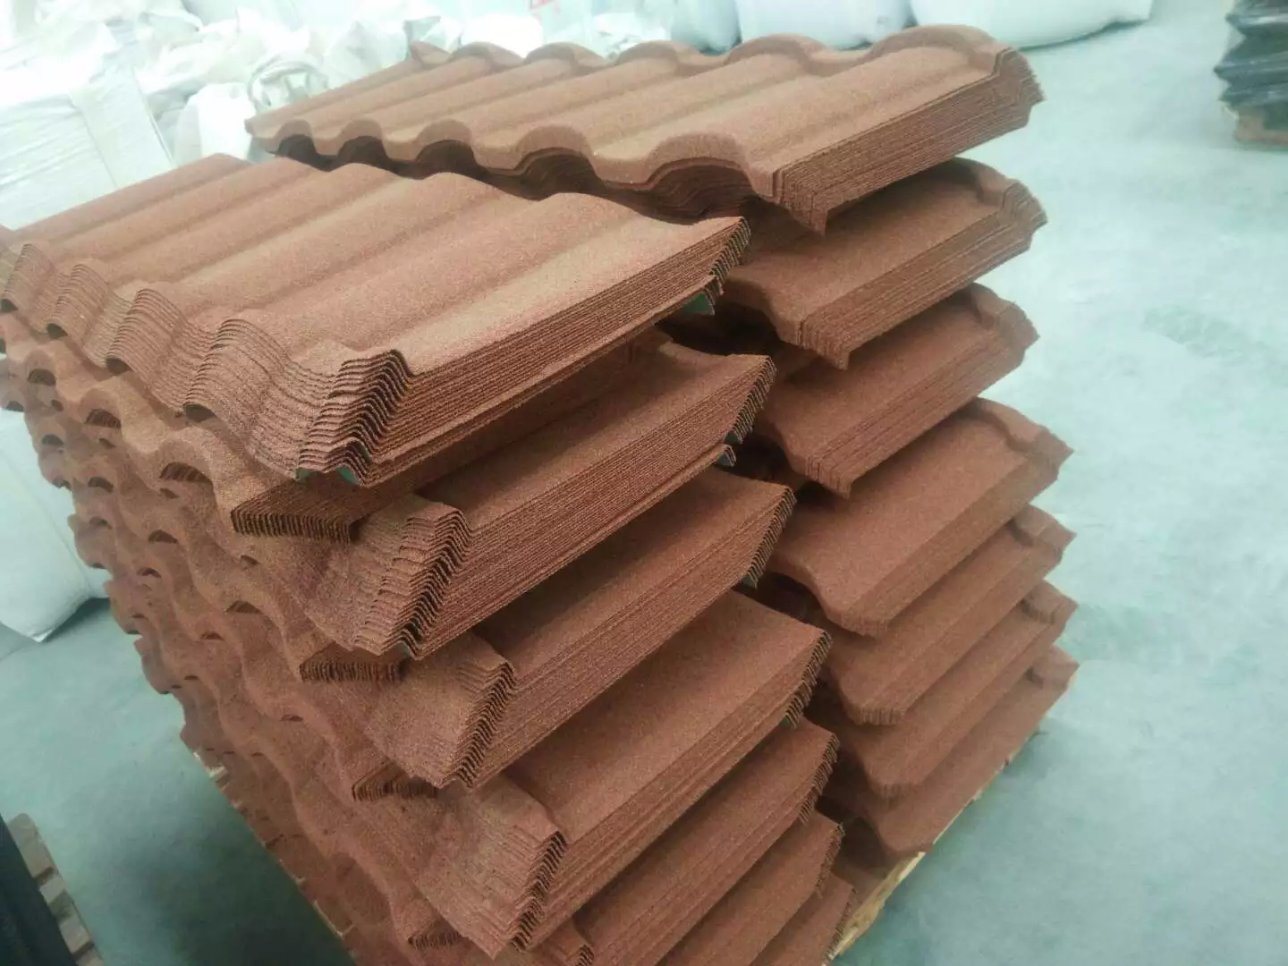 Building Material Corrugated Roofing Materials Stone Coated Metal Roof Tile Hot Sale in Philippines